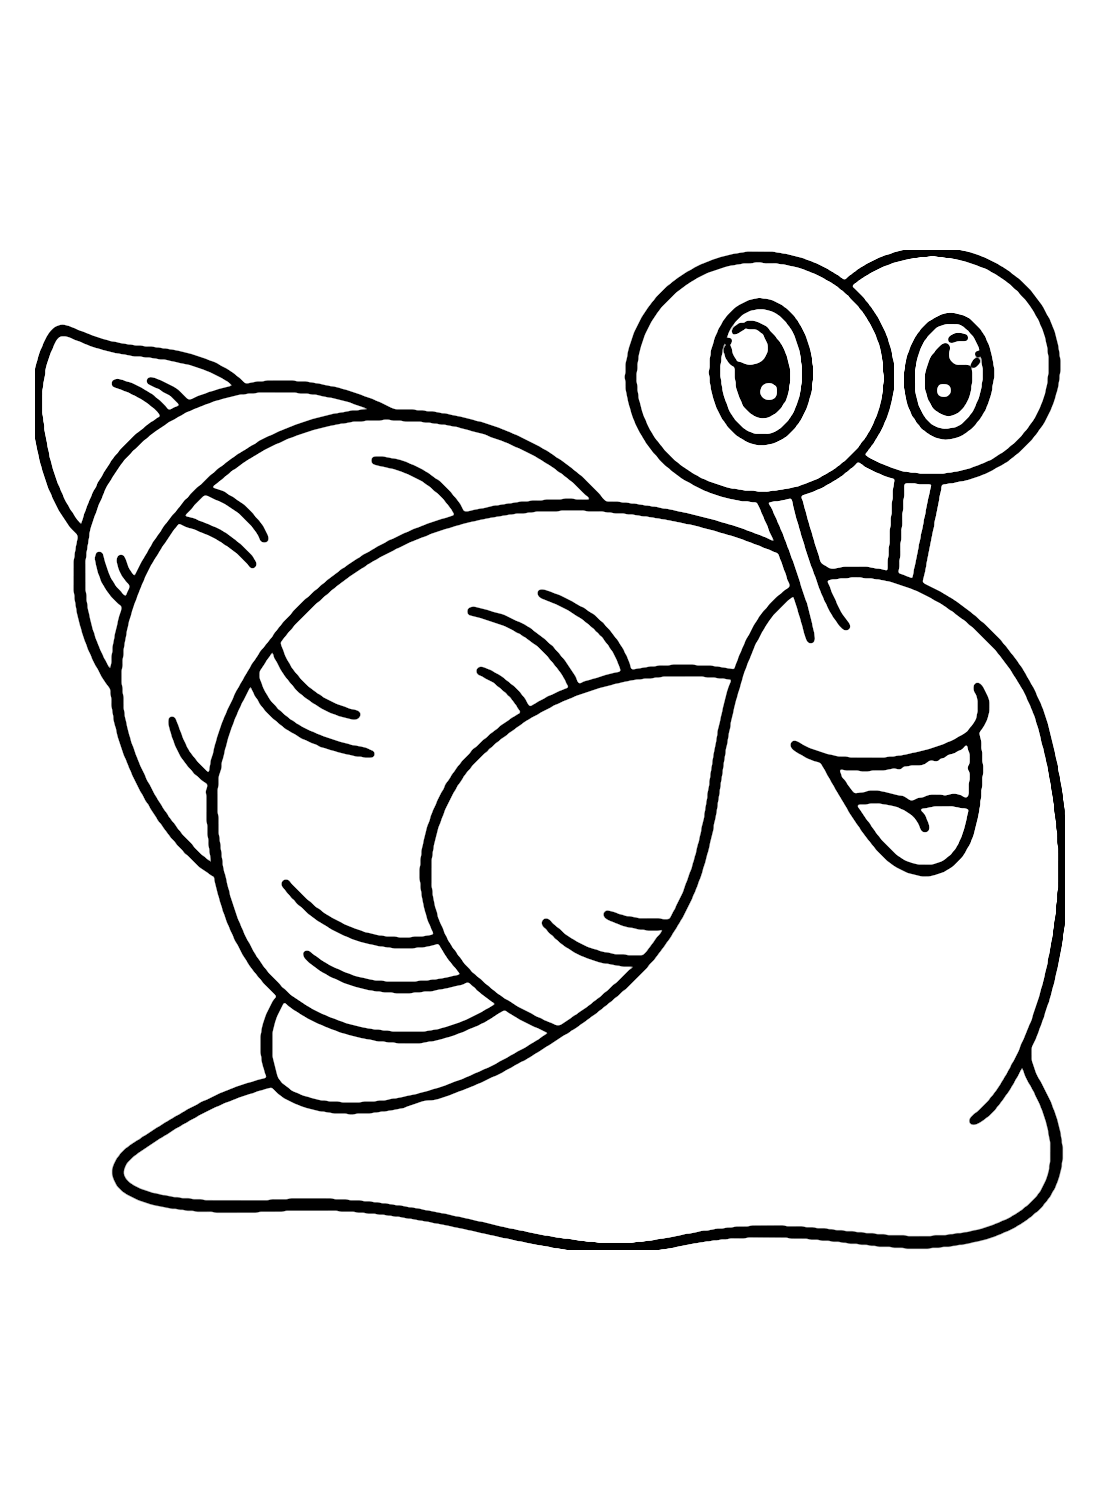 Sea snail coloring pages printable for free download